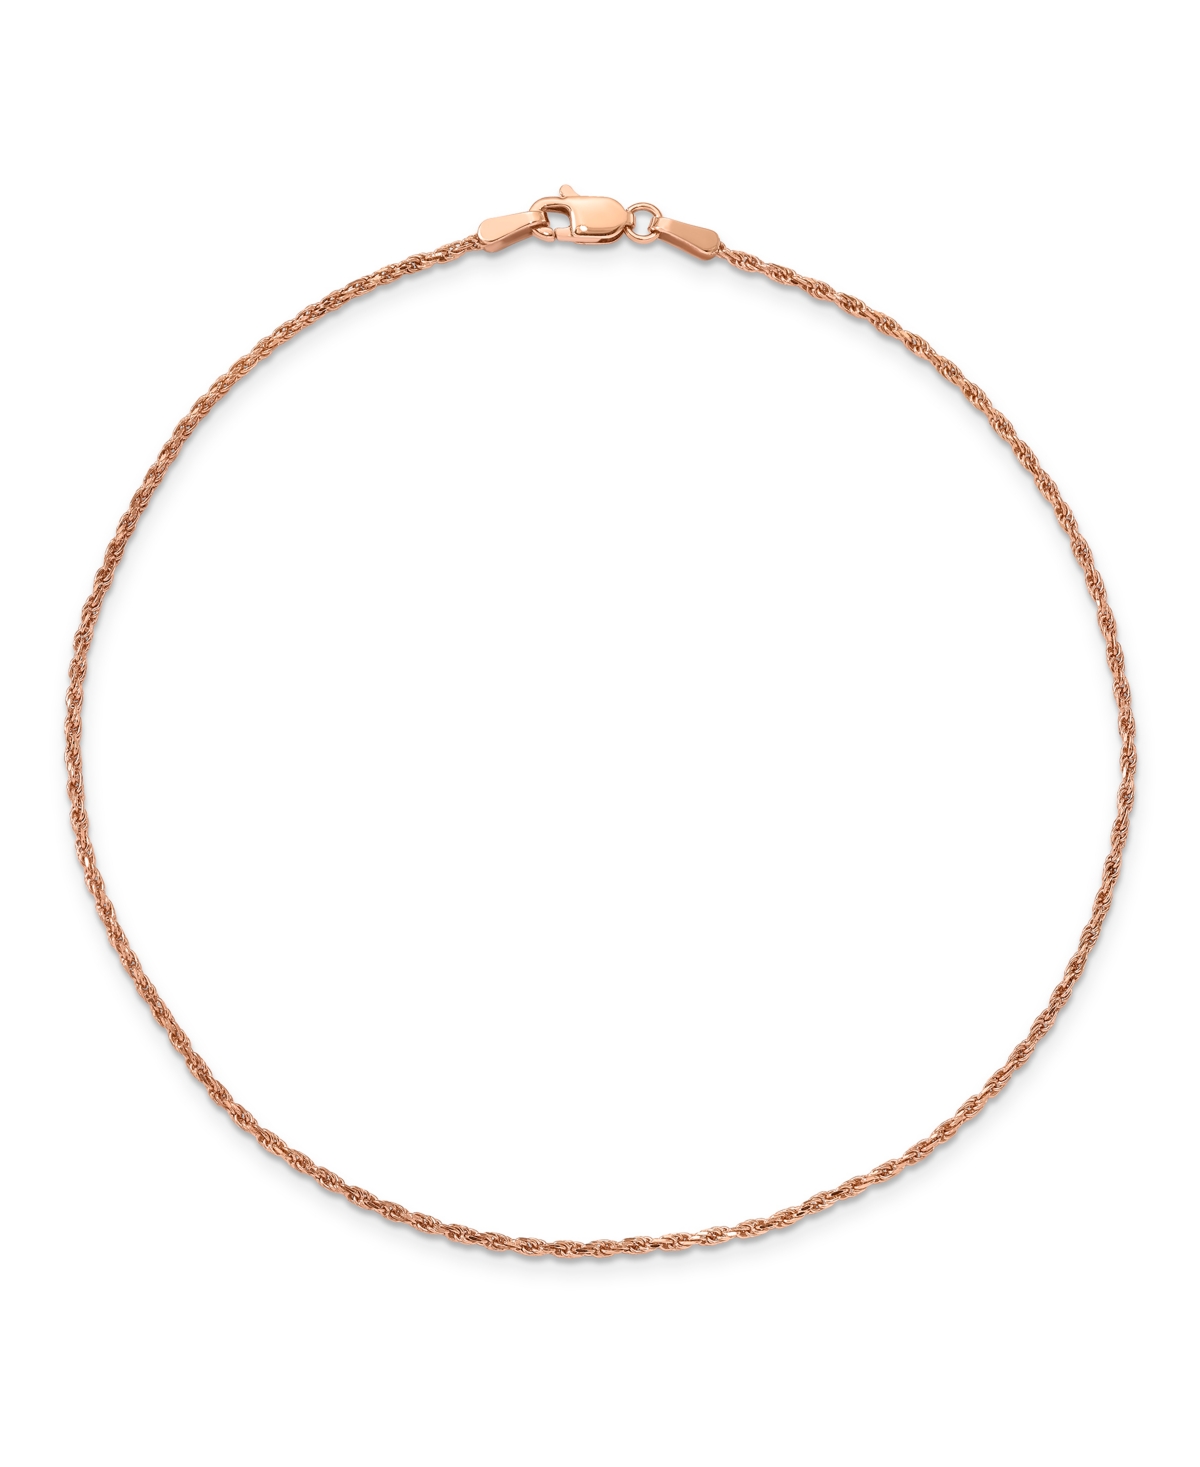 Rope Chain Anklet in 14k Rose Gold - Rose Gold